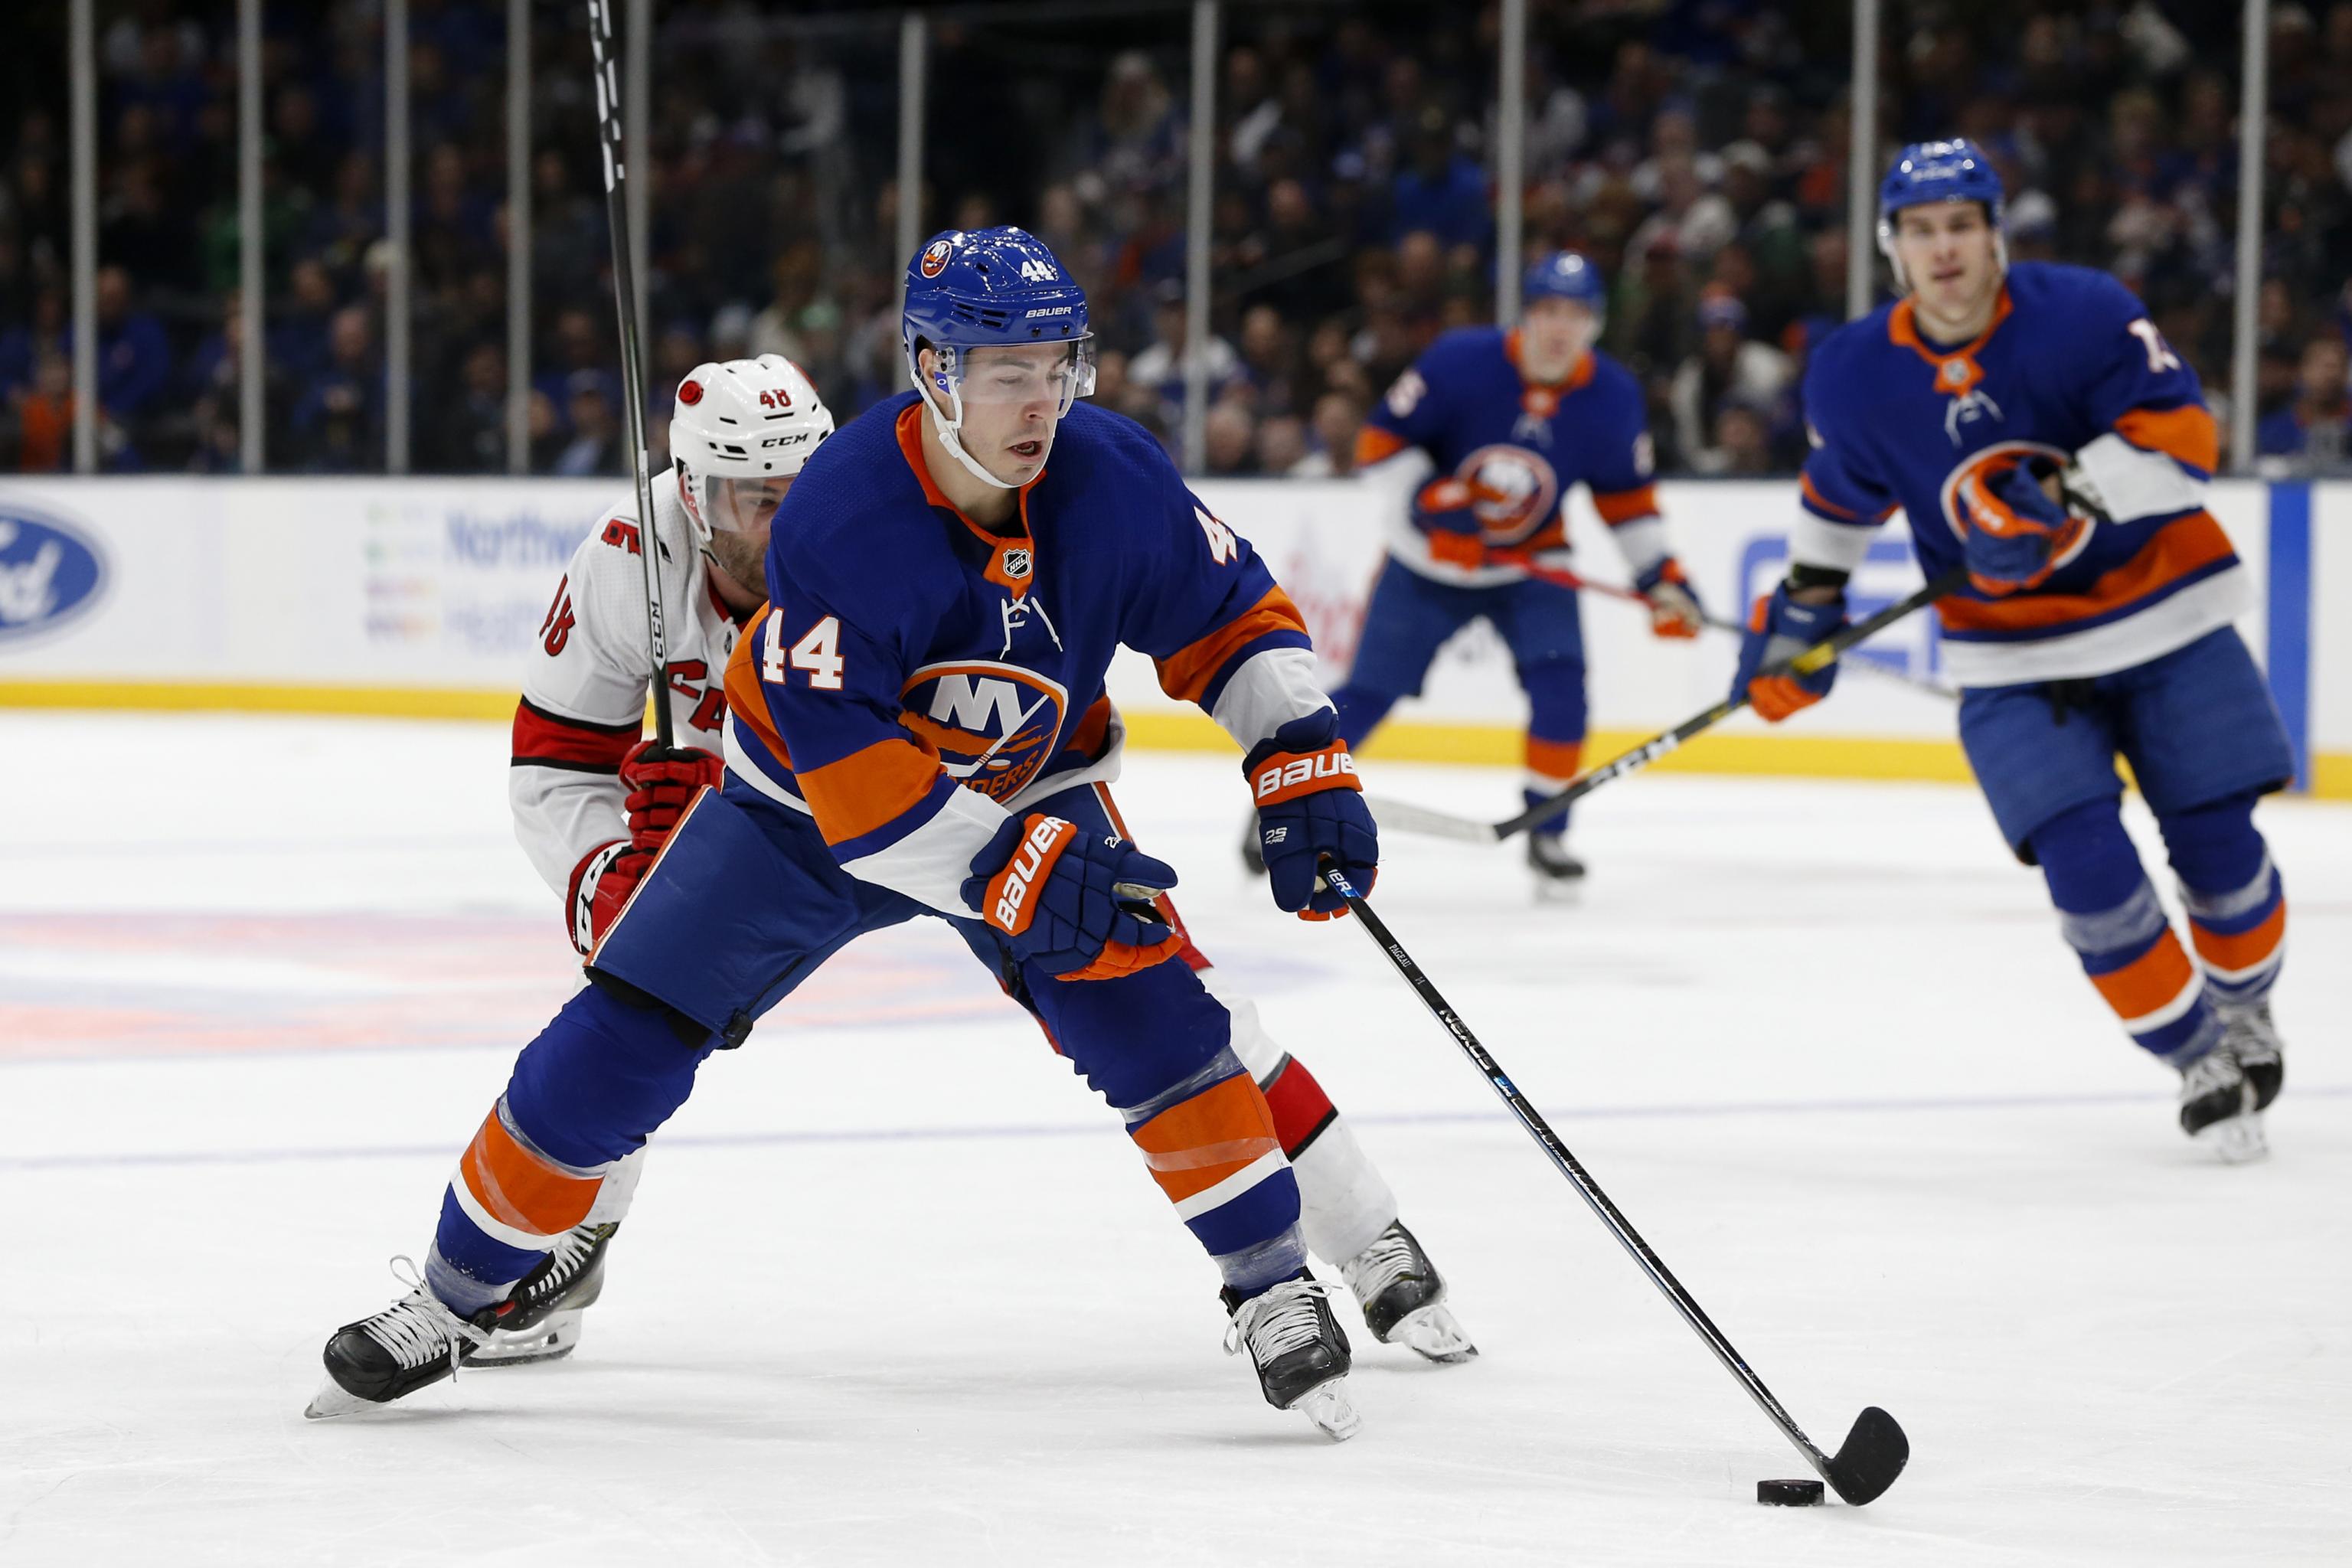 Nhl Playoffs Game 6 Tv Schedule And Odds For Lightning Vs Islanders Bleacher Report Latest News Videos And Highlights